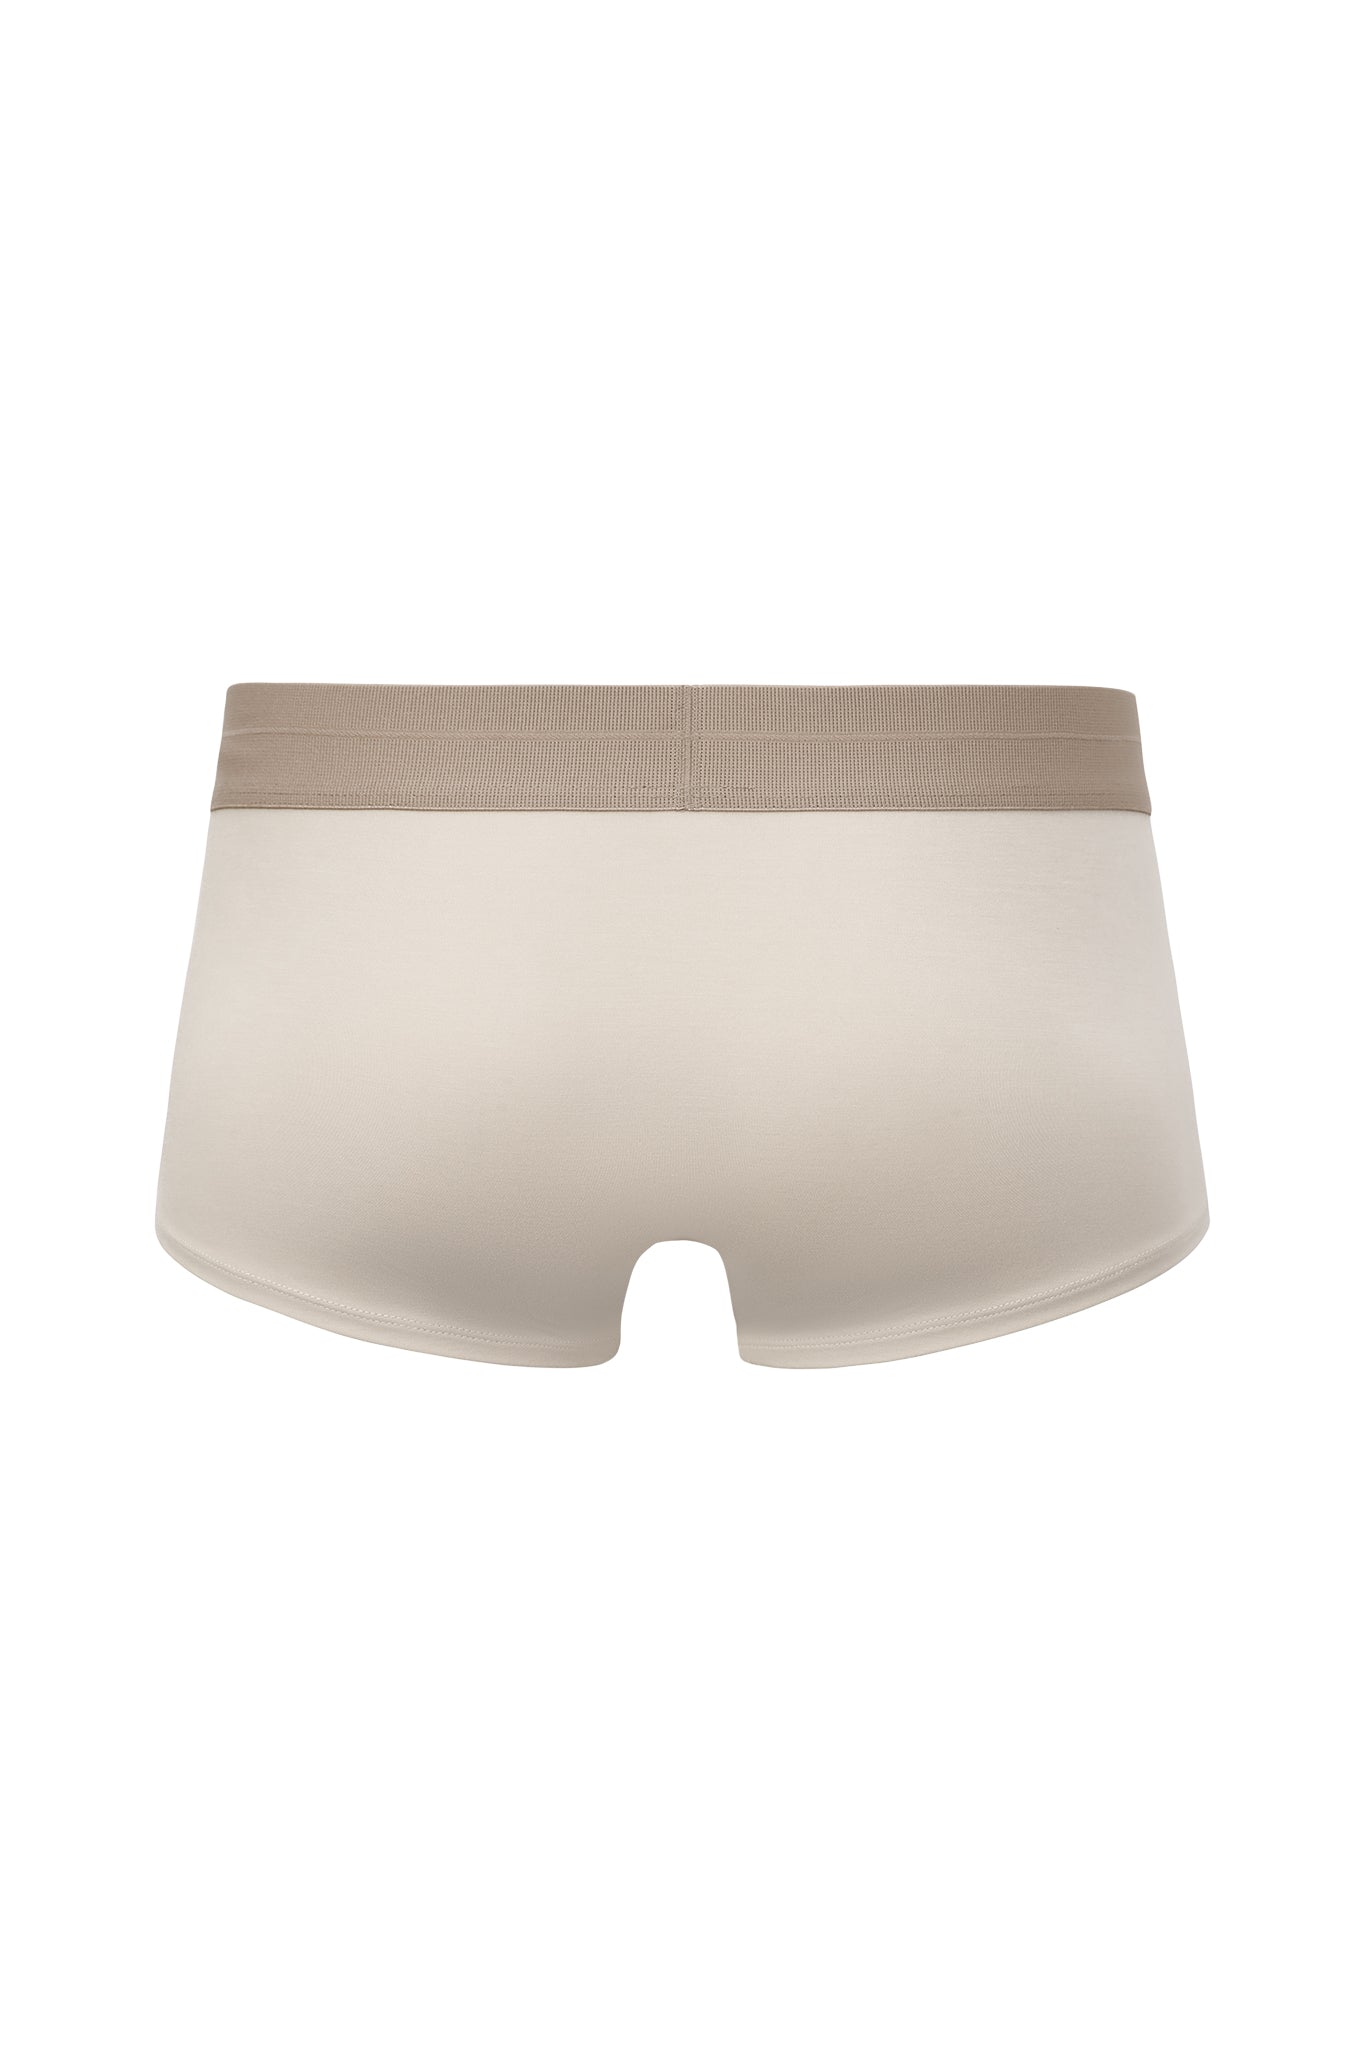 SUNSET GLOW TRUNK - AFTERGLOW BROWN